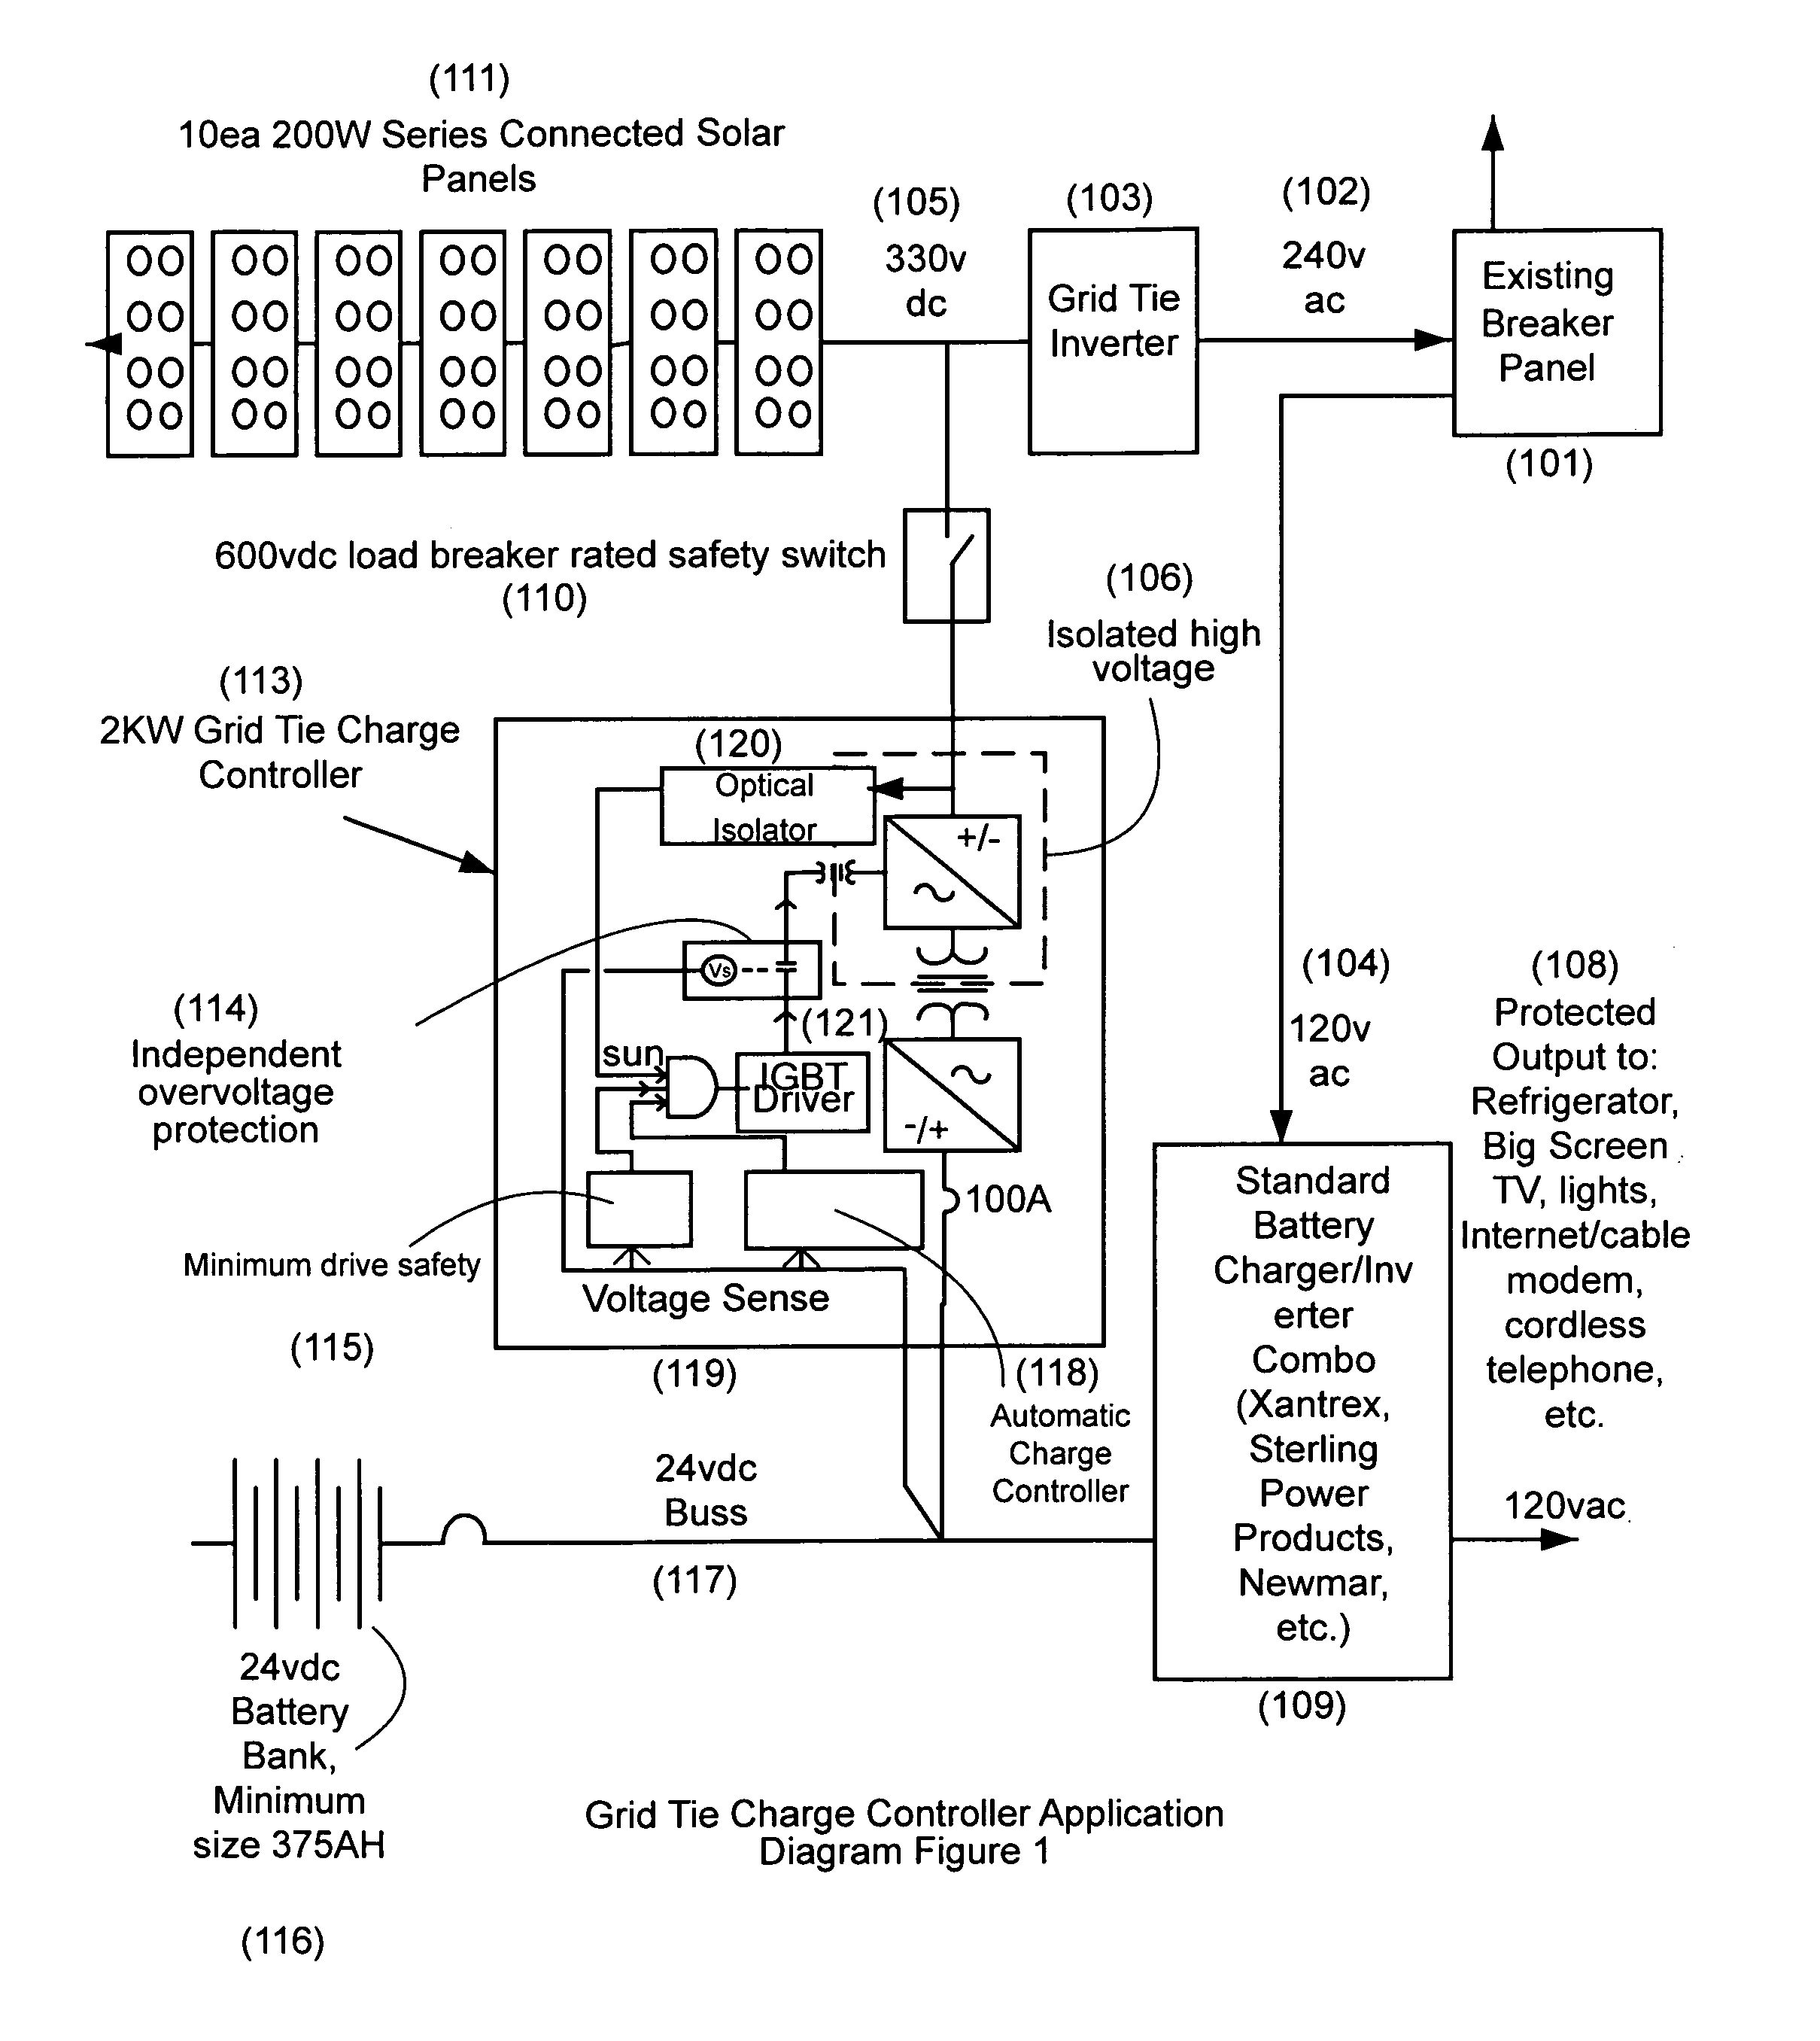 Grid tie charge controller